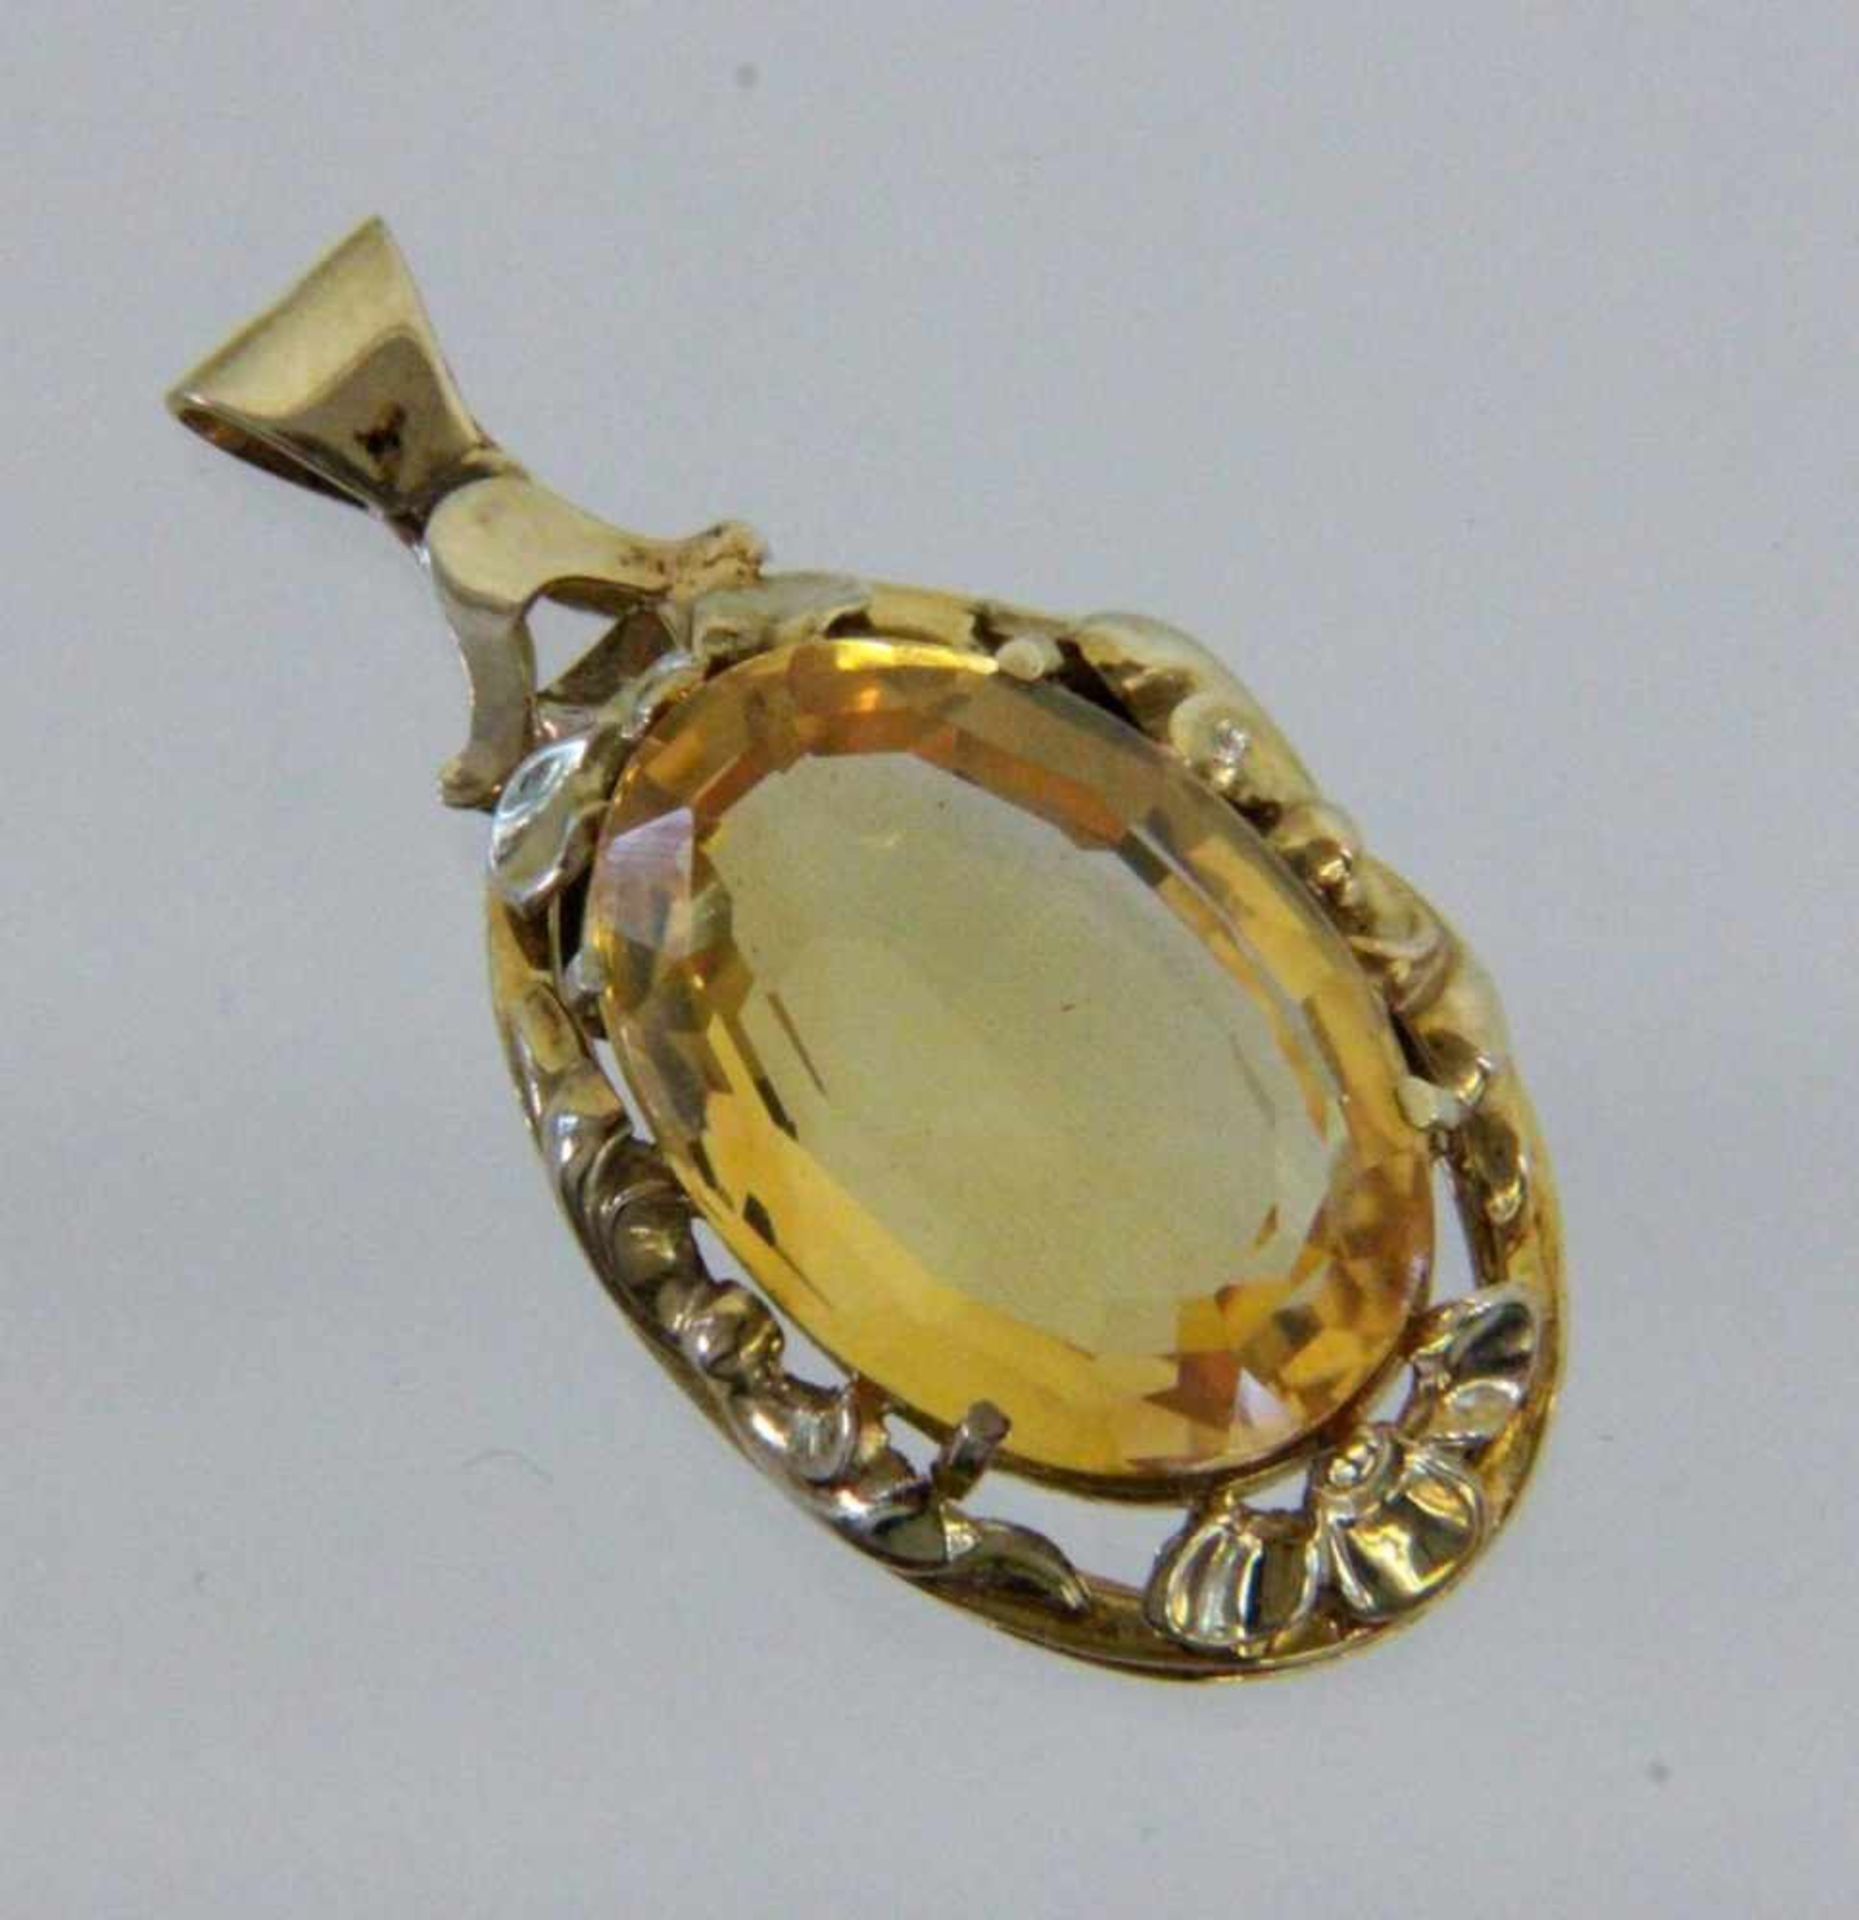 ANHÄNGER, 585/000 Gelbgold mit Citrin. L.3,8cm, Brutto ca. 6,8g A PENDANT 585/000 yellow gold with